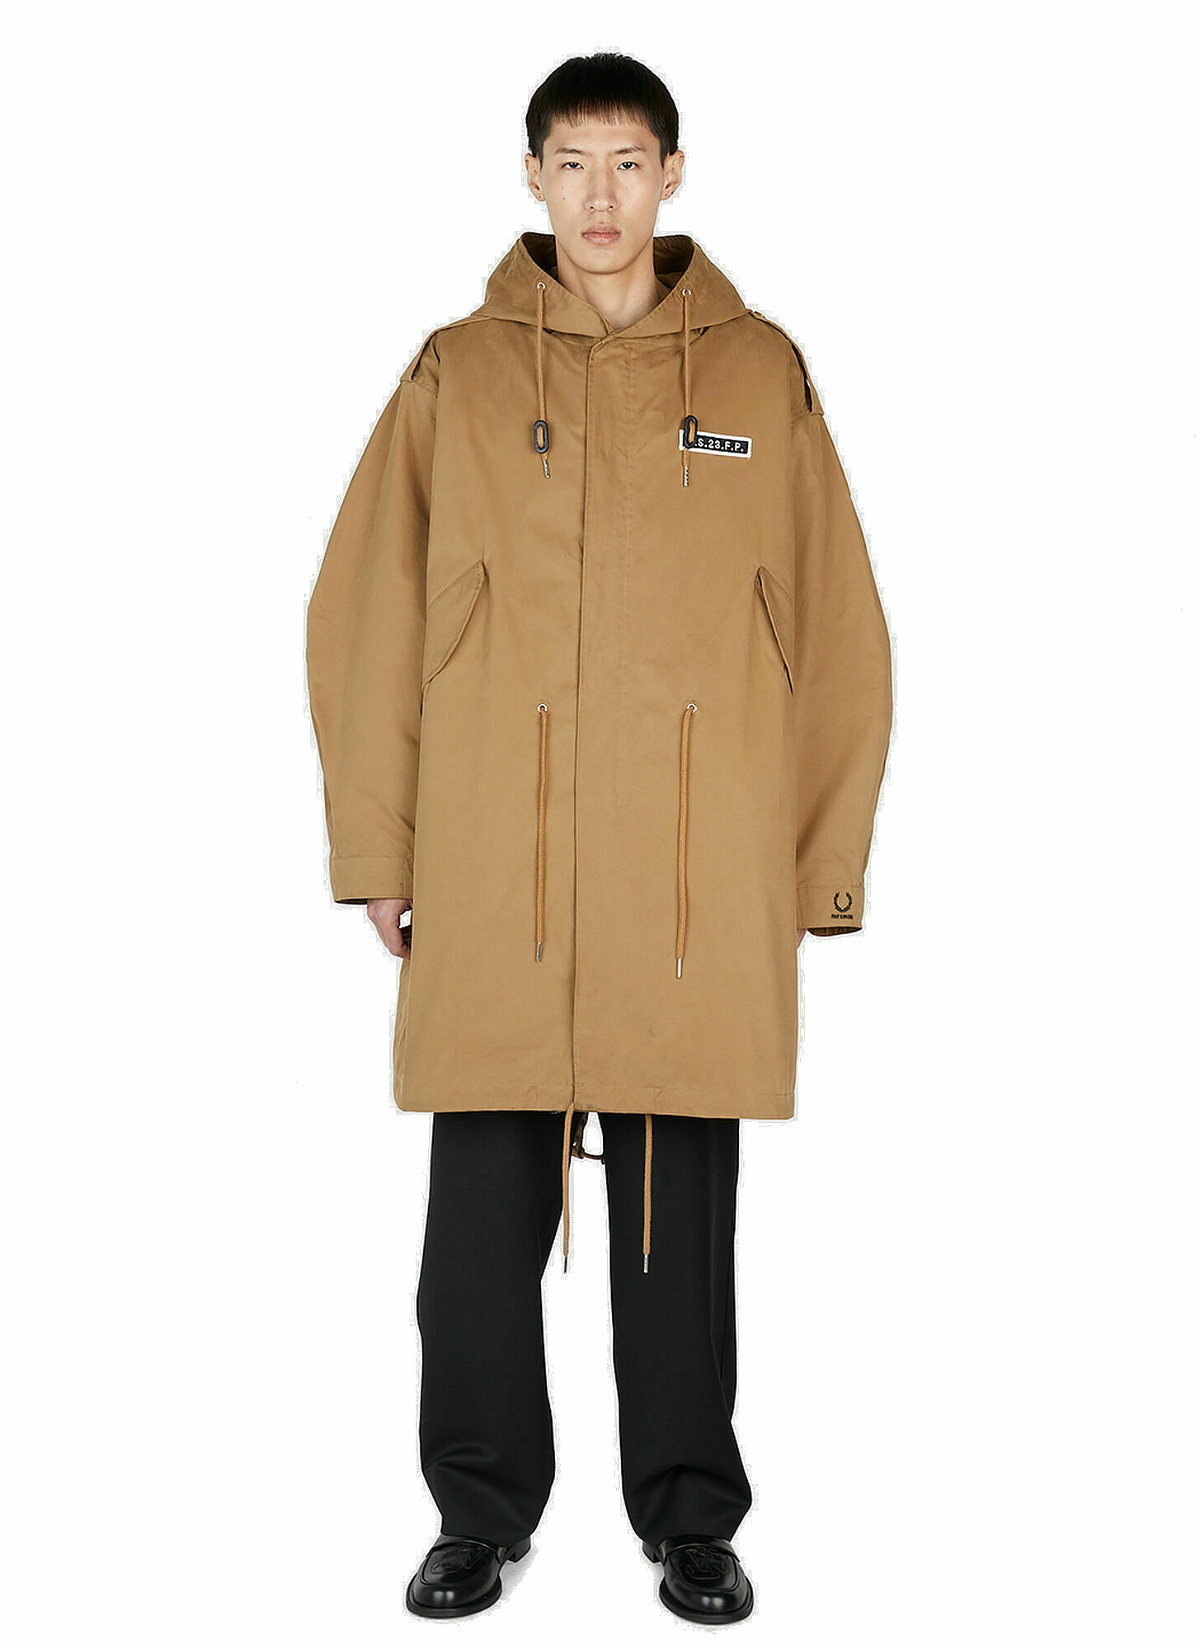 Photo: Raf Simons x Fred Perry - Printed Parka Coat in Camel